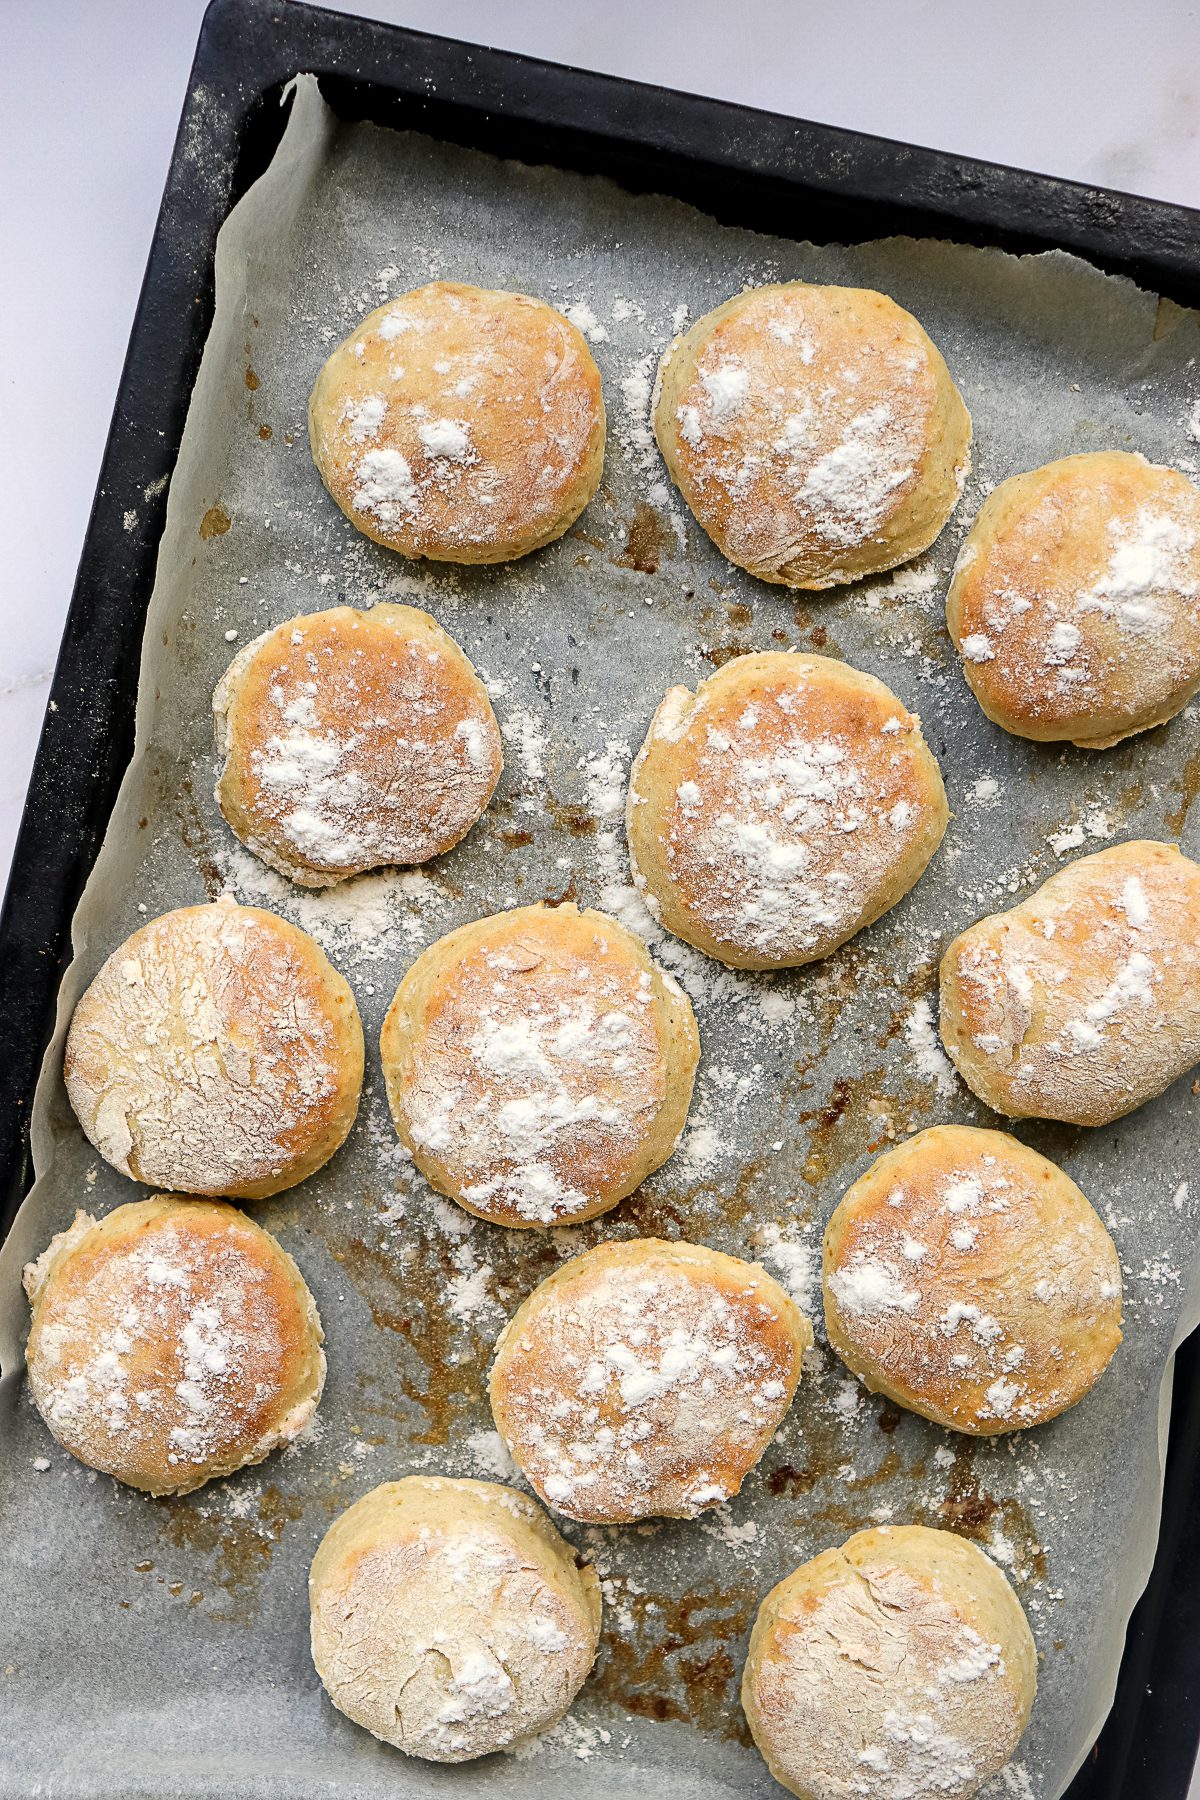 Homemade biscuits made with applesauce